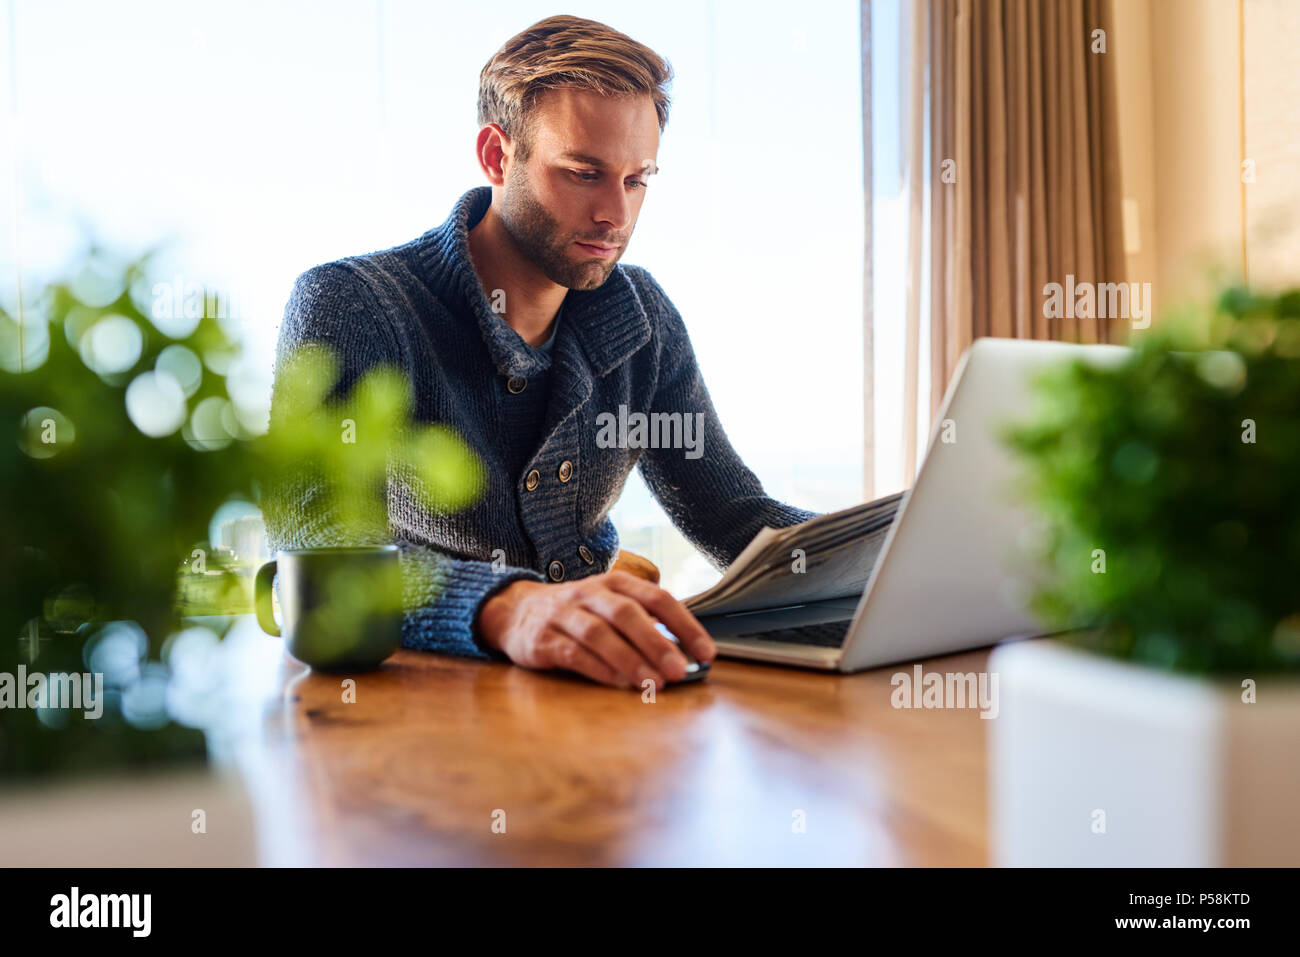 Handsome modern man busy reading the newspaper and checking his mails to catch up on current affairs from the comfort of his home while seated at his dining table. Stock Photo